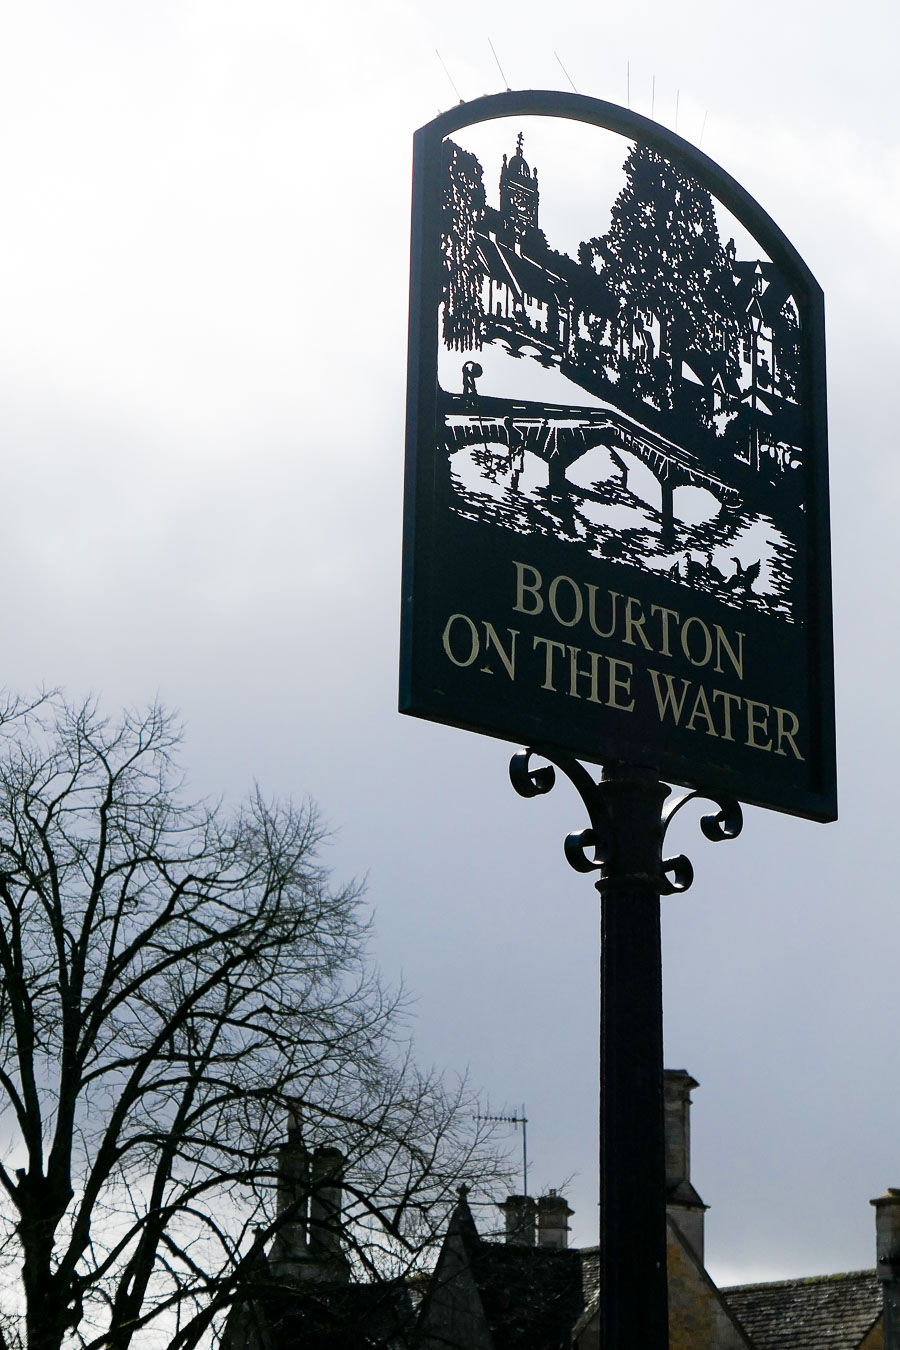 What to Do in the Cotswolds - English Countryside - Bourton on the Water